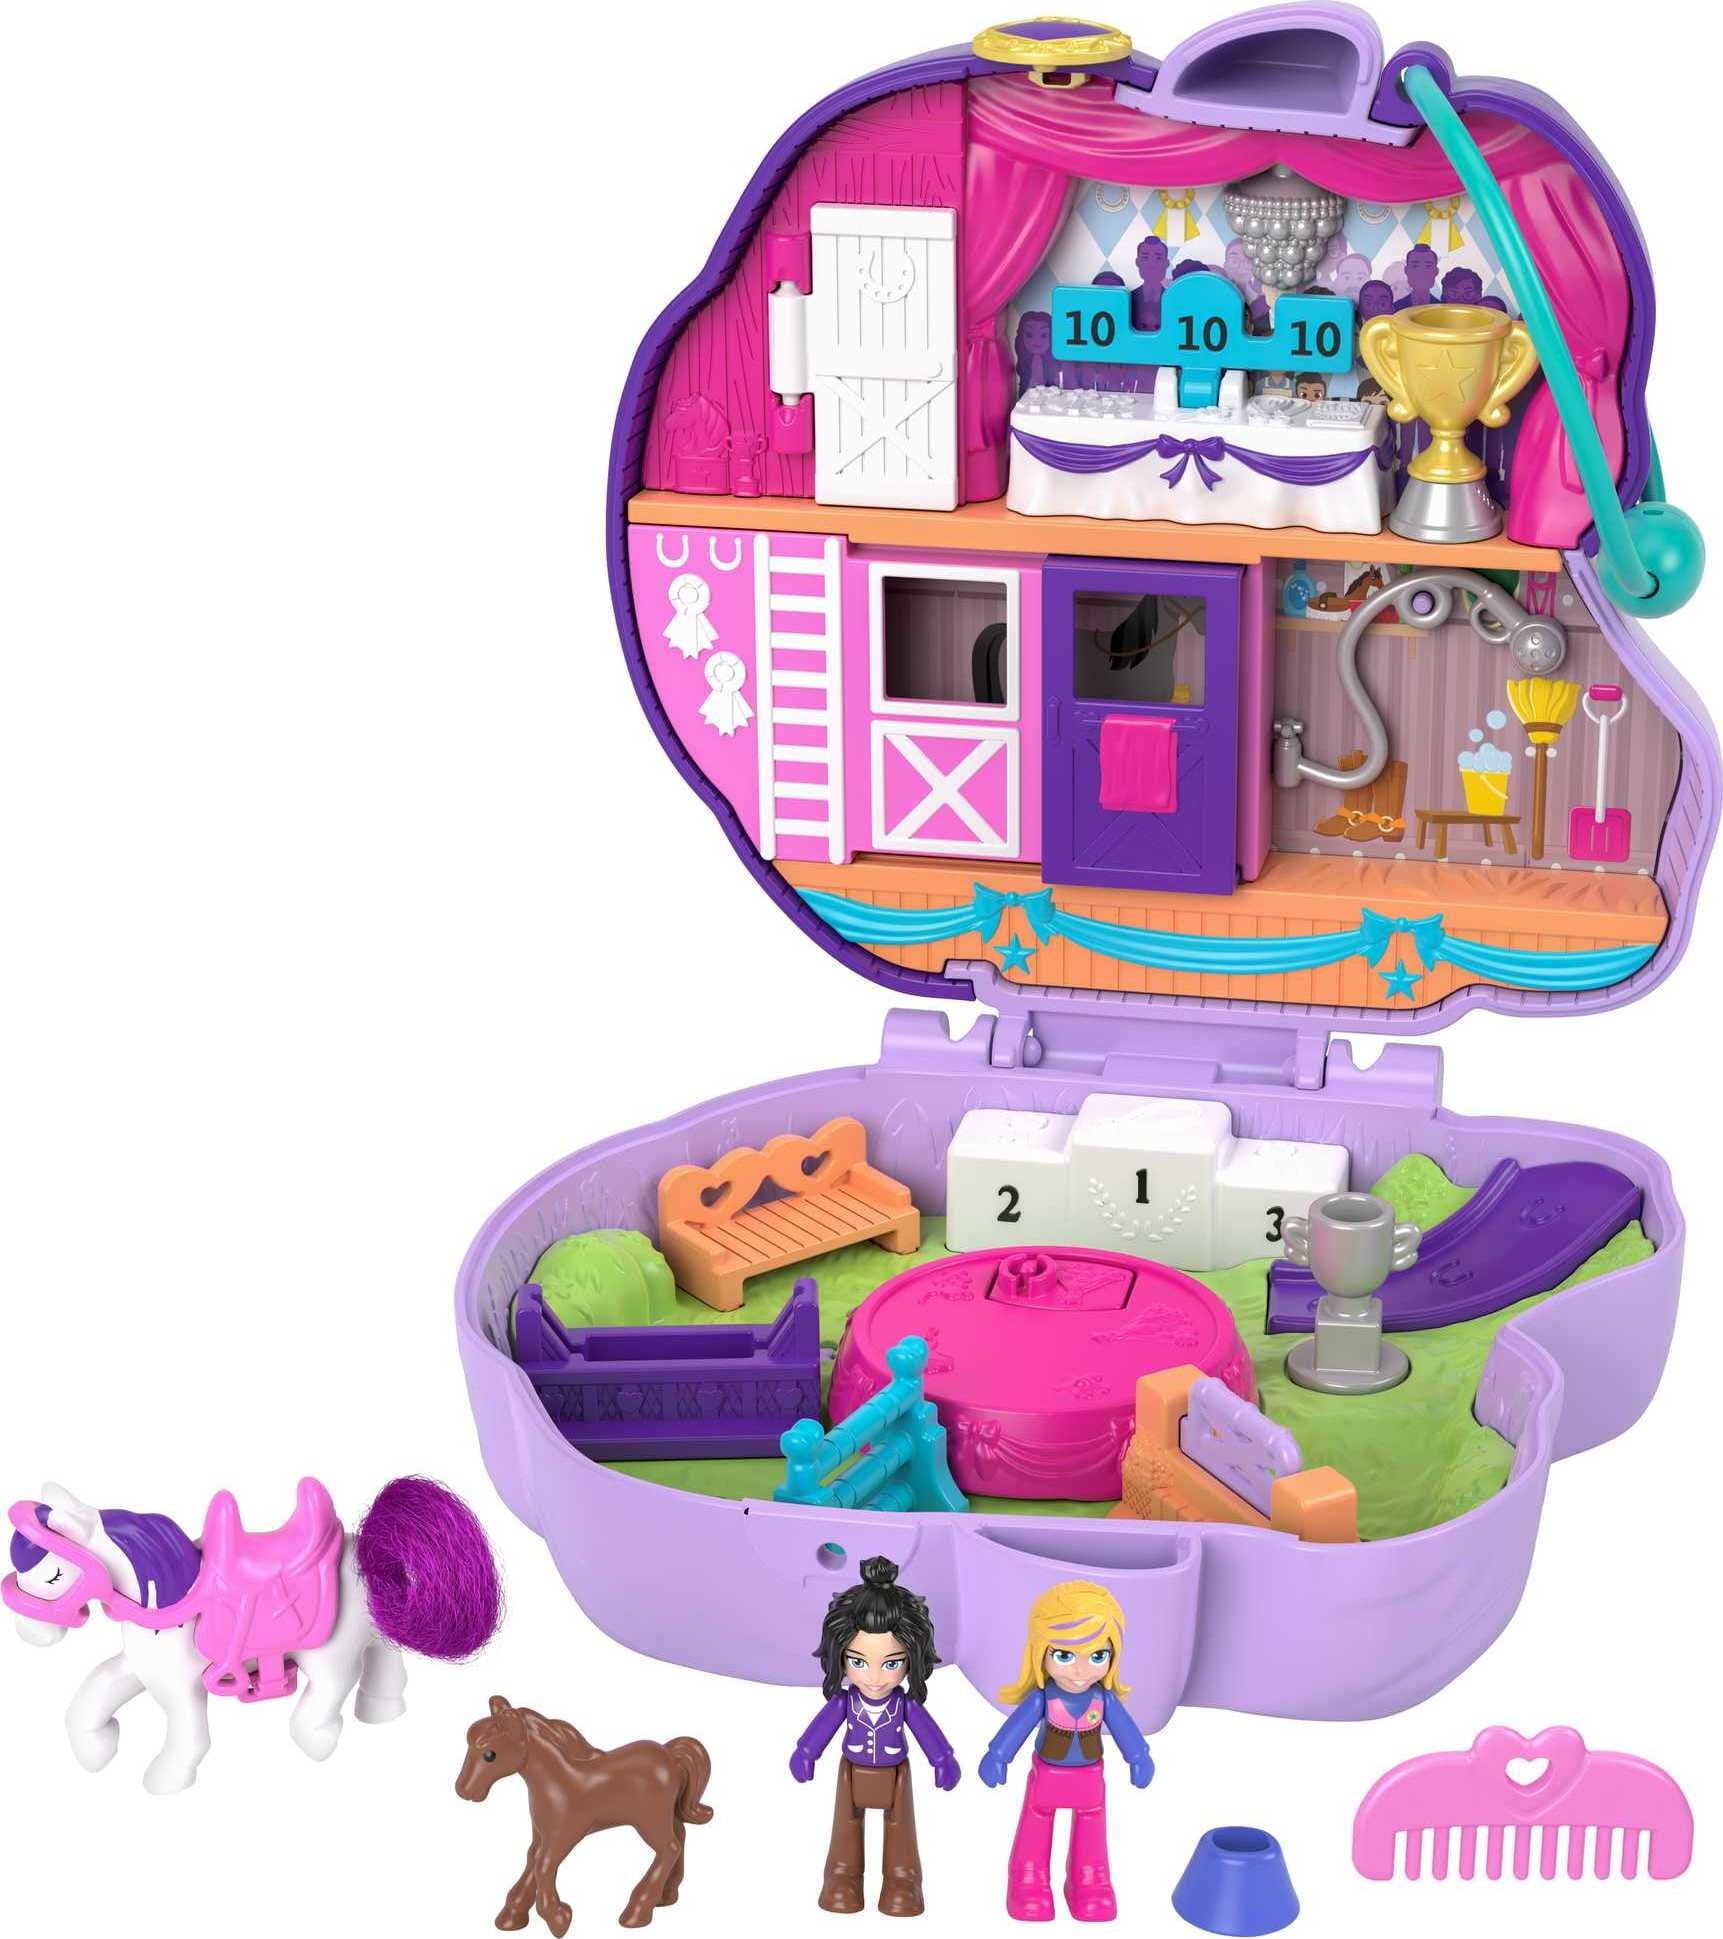 Polly Pocket Jumpin’ Style Pony Compact with Horse Show Theme, Micro Polly Doll & Friend, 2 Horse Figures (1 with Saddle & Tail Hair), Fun Features & Surprise Reveals, Great Gift for Ages 4 & Up